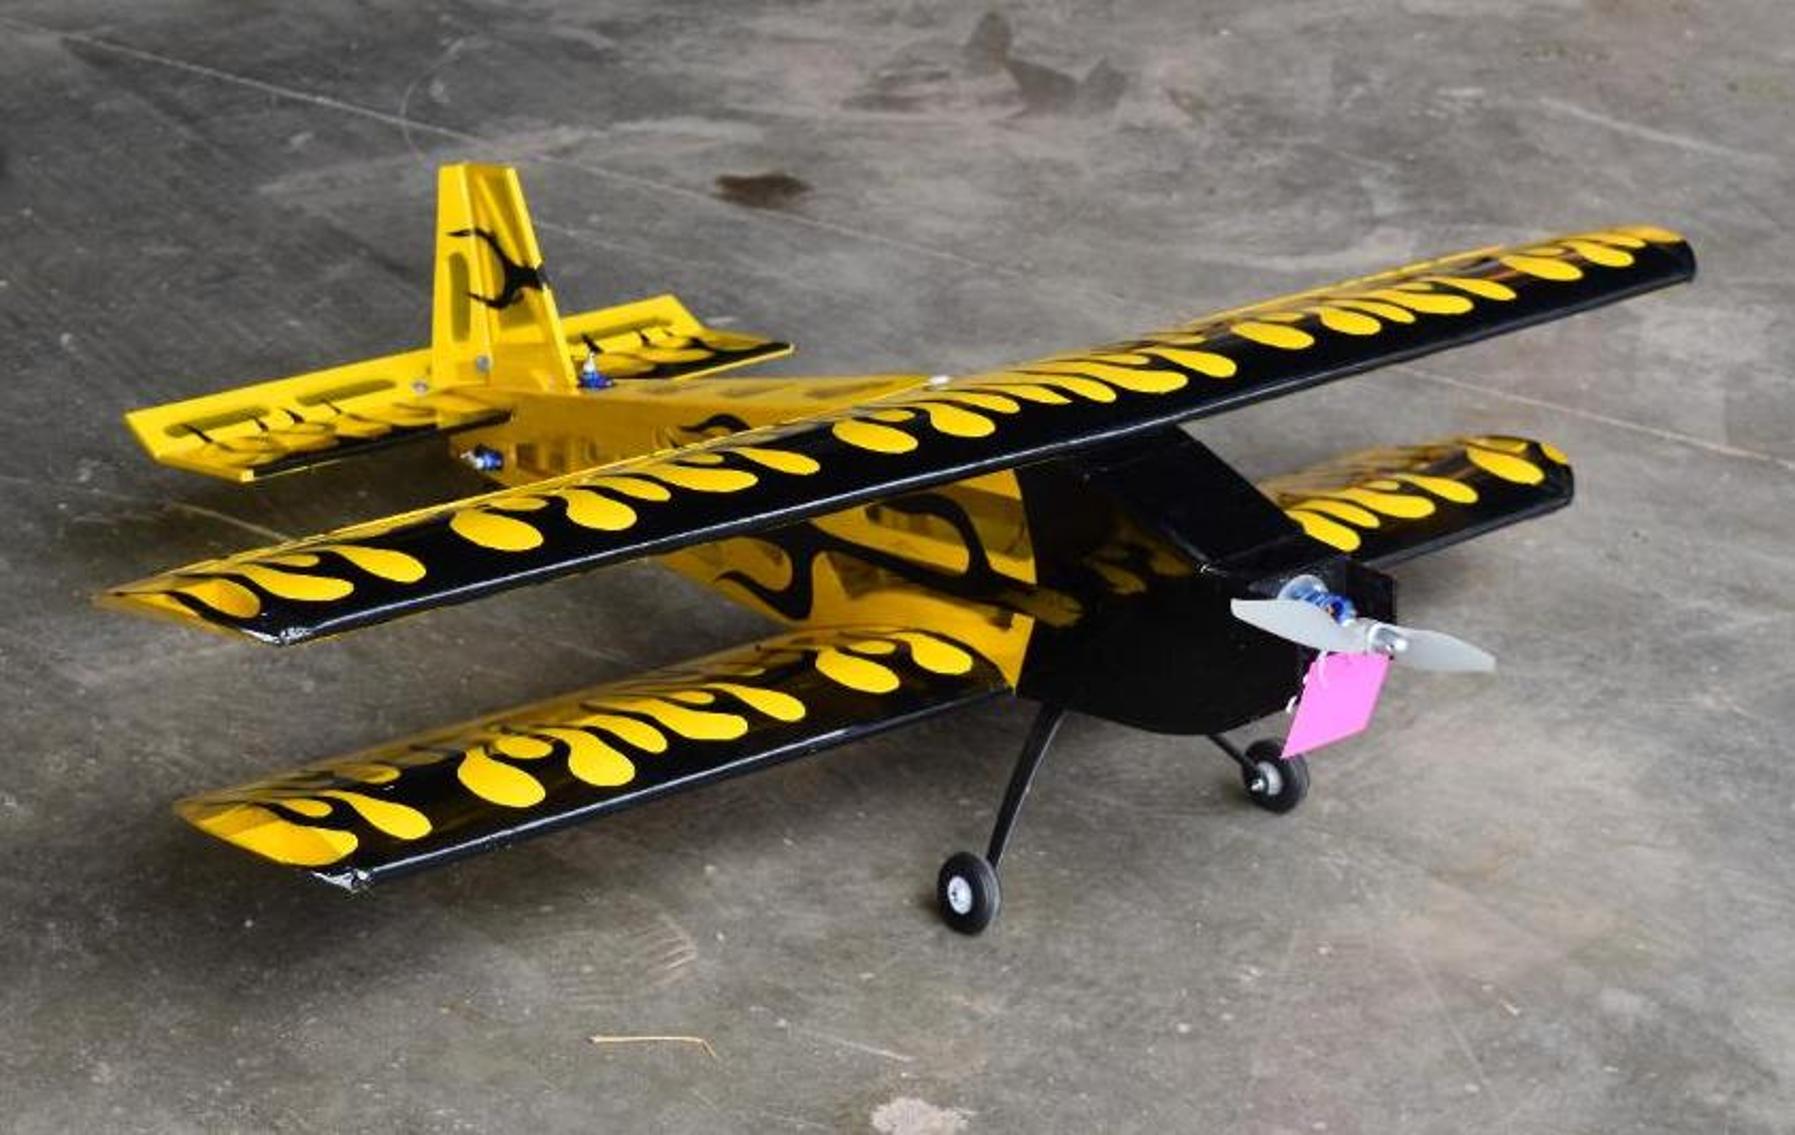 (9) RC Airplanes